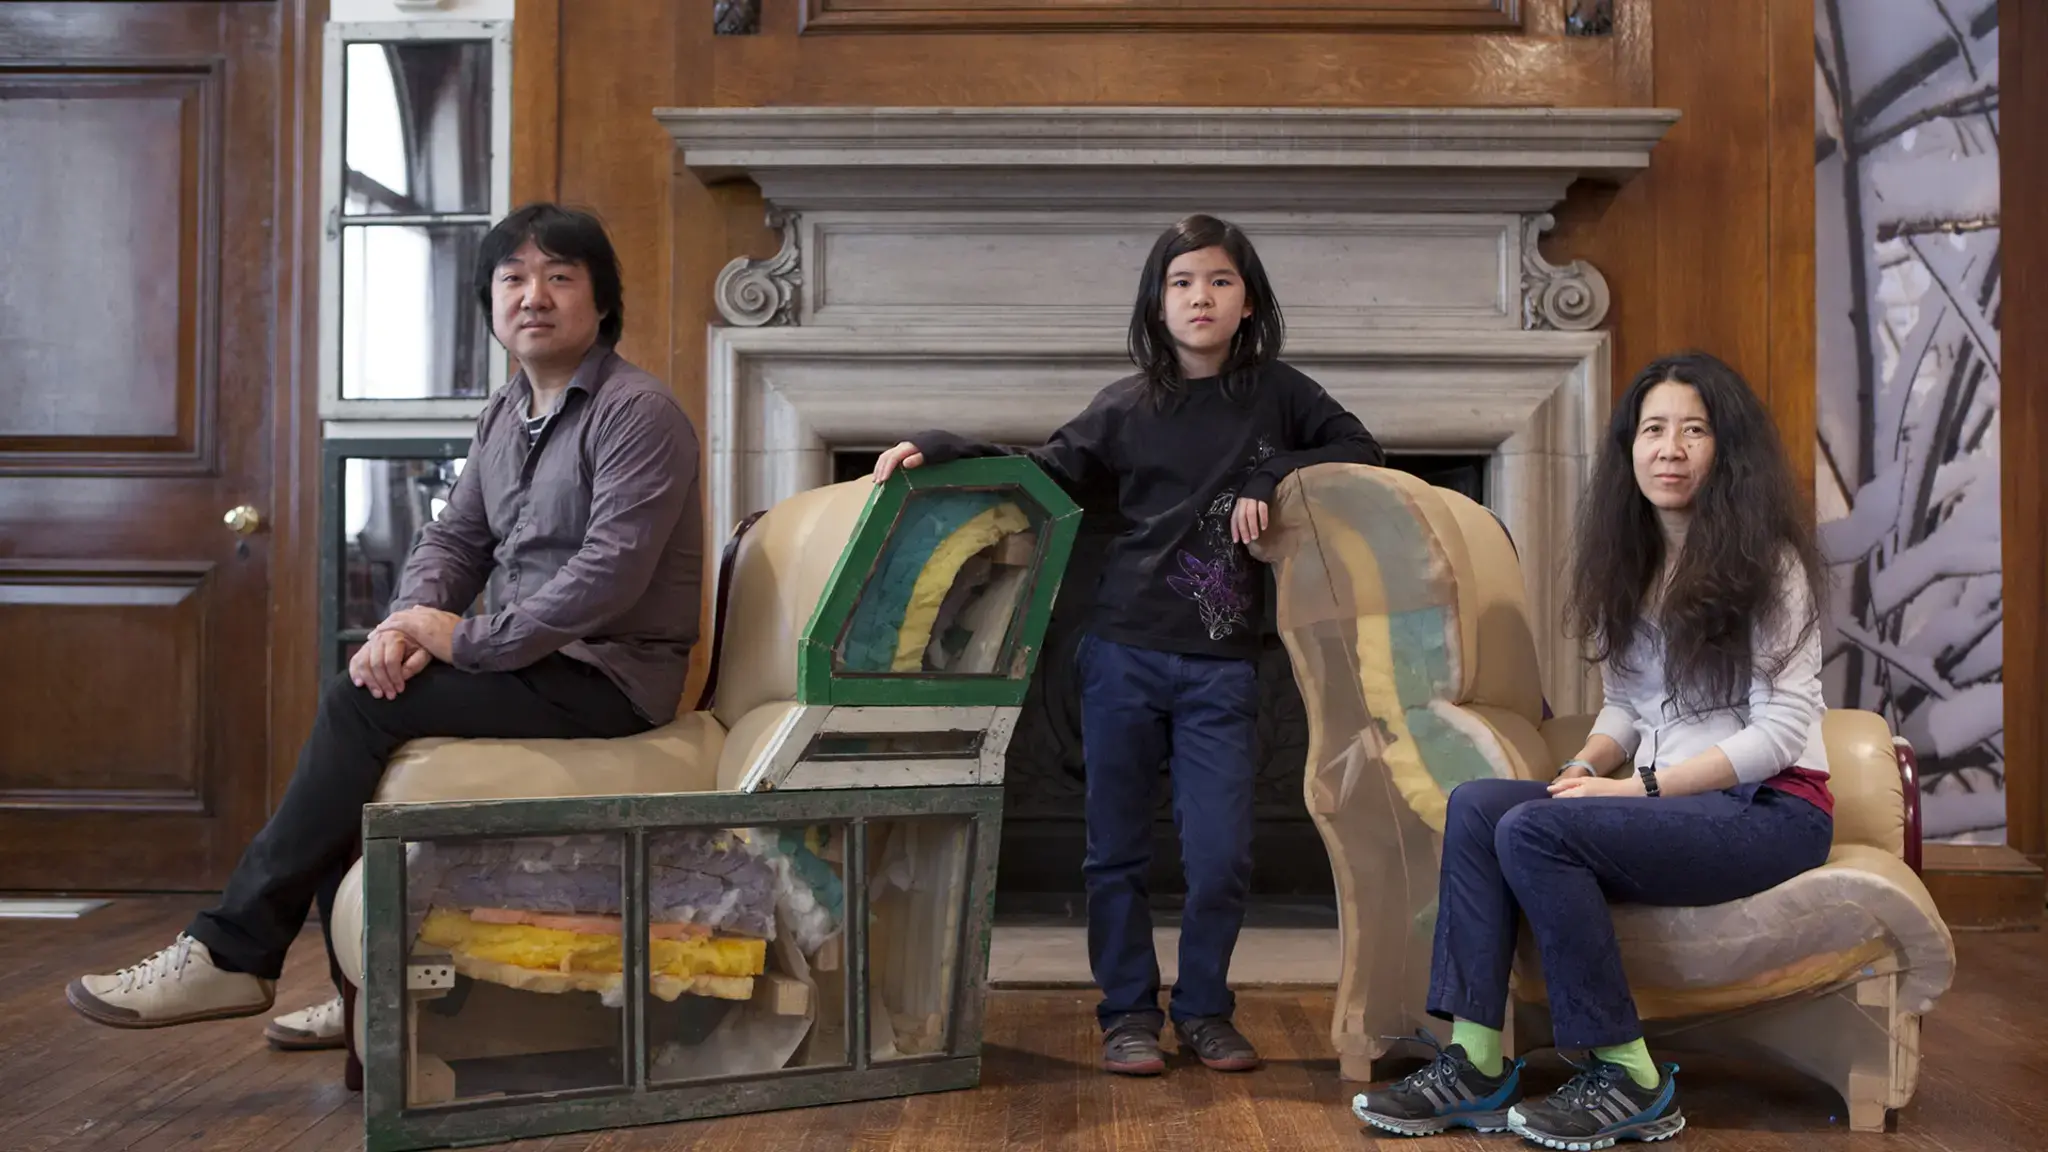 Left to right: Song Dong, Song ErRui, and Yin Xiuzhen. Image courtesy of the Philadelphia Art Alliance.